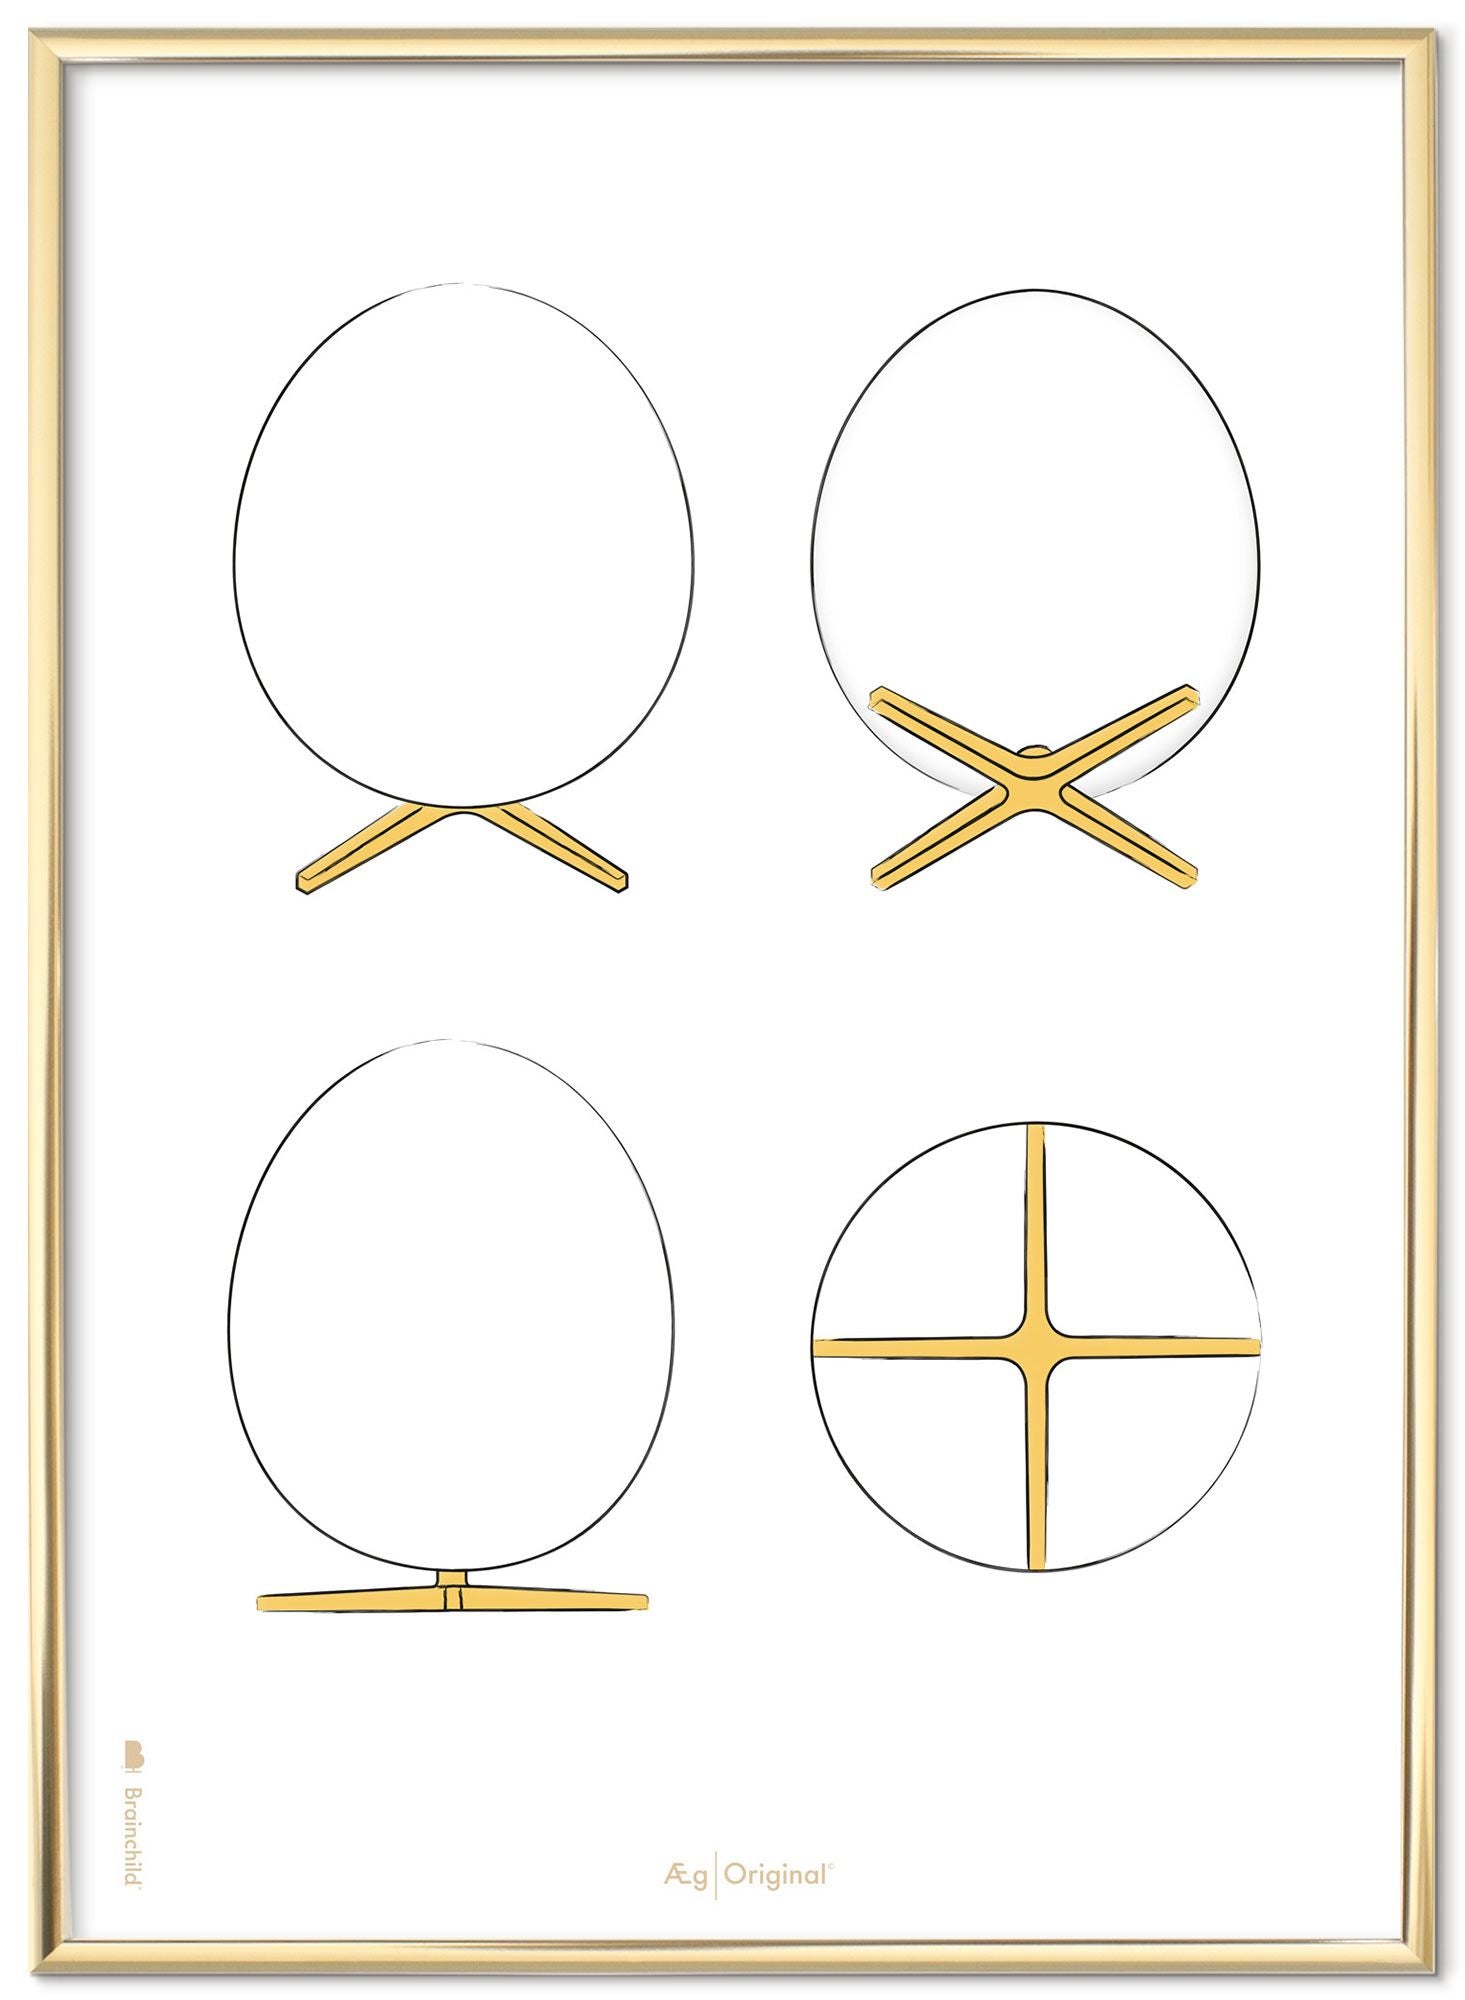 Brainchild The Egg Design Sketches Poster Frame Made Of Brass Colored Metal A5, White Background